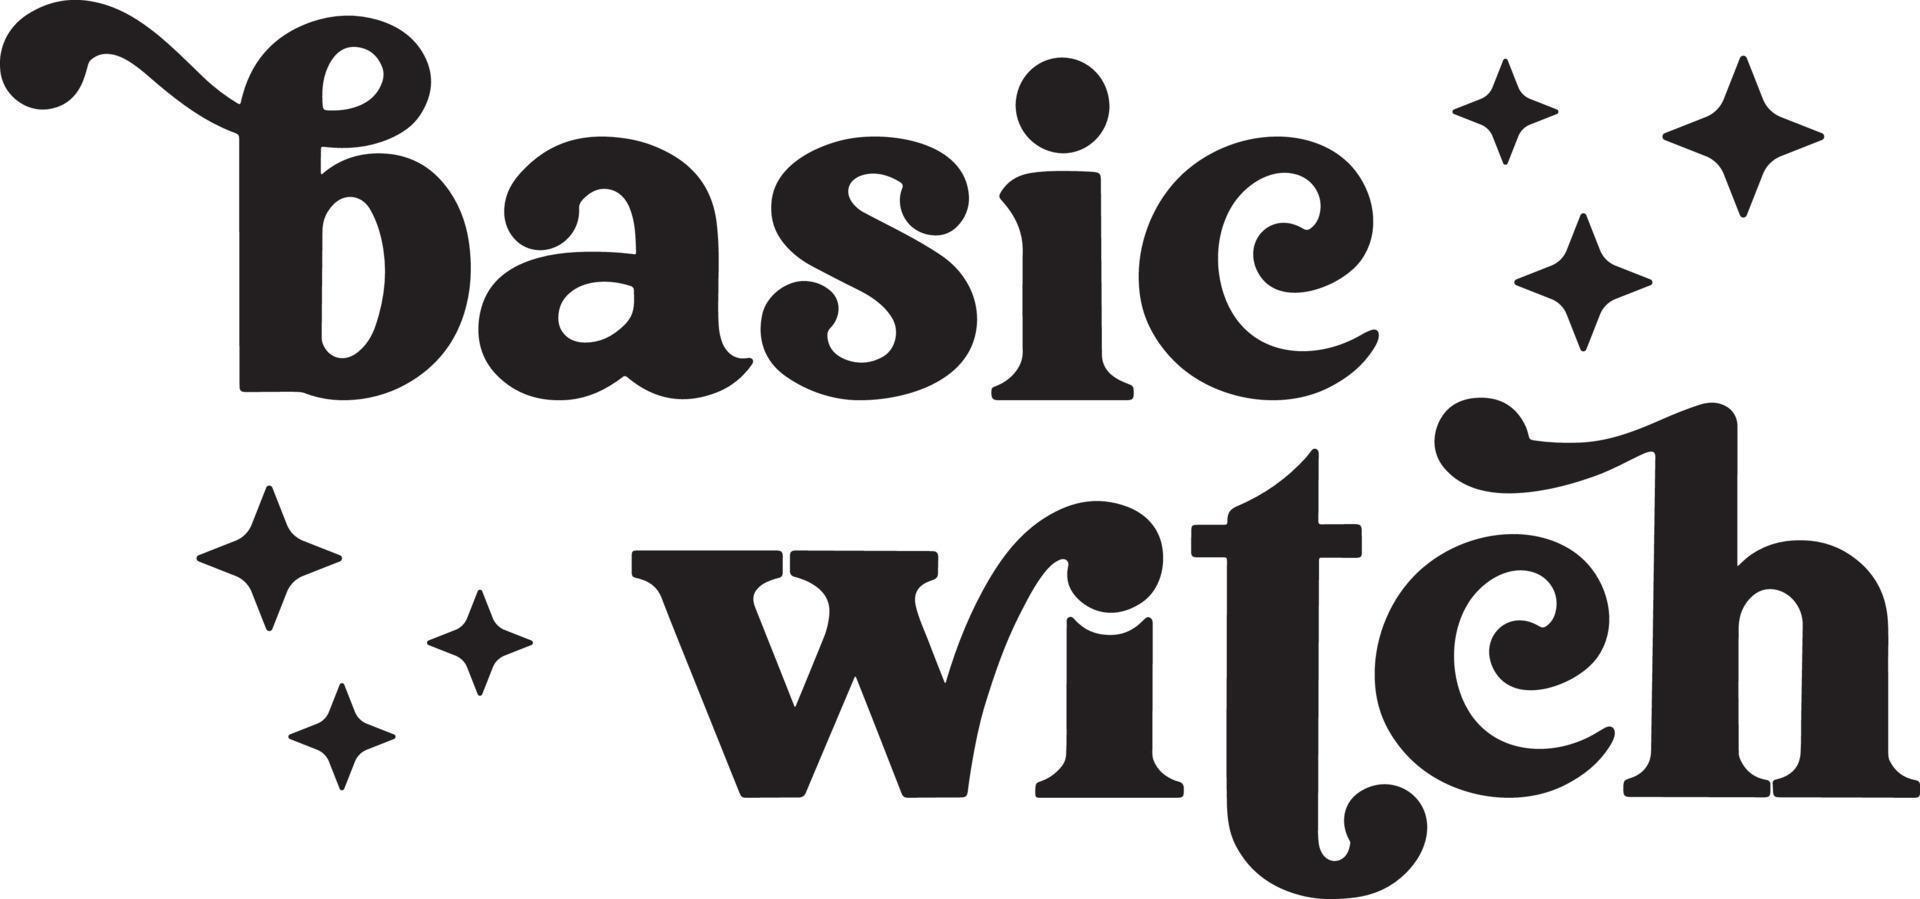 Basic witch. halloween lettering vector